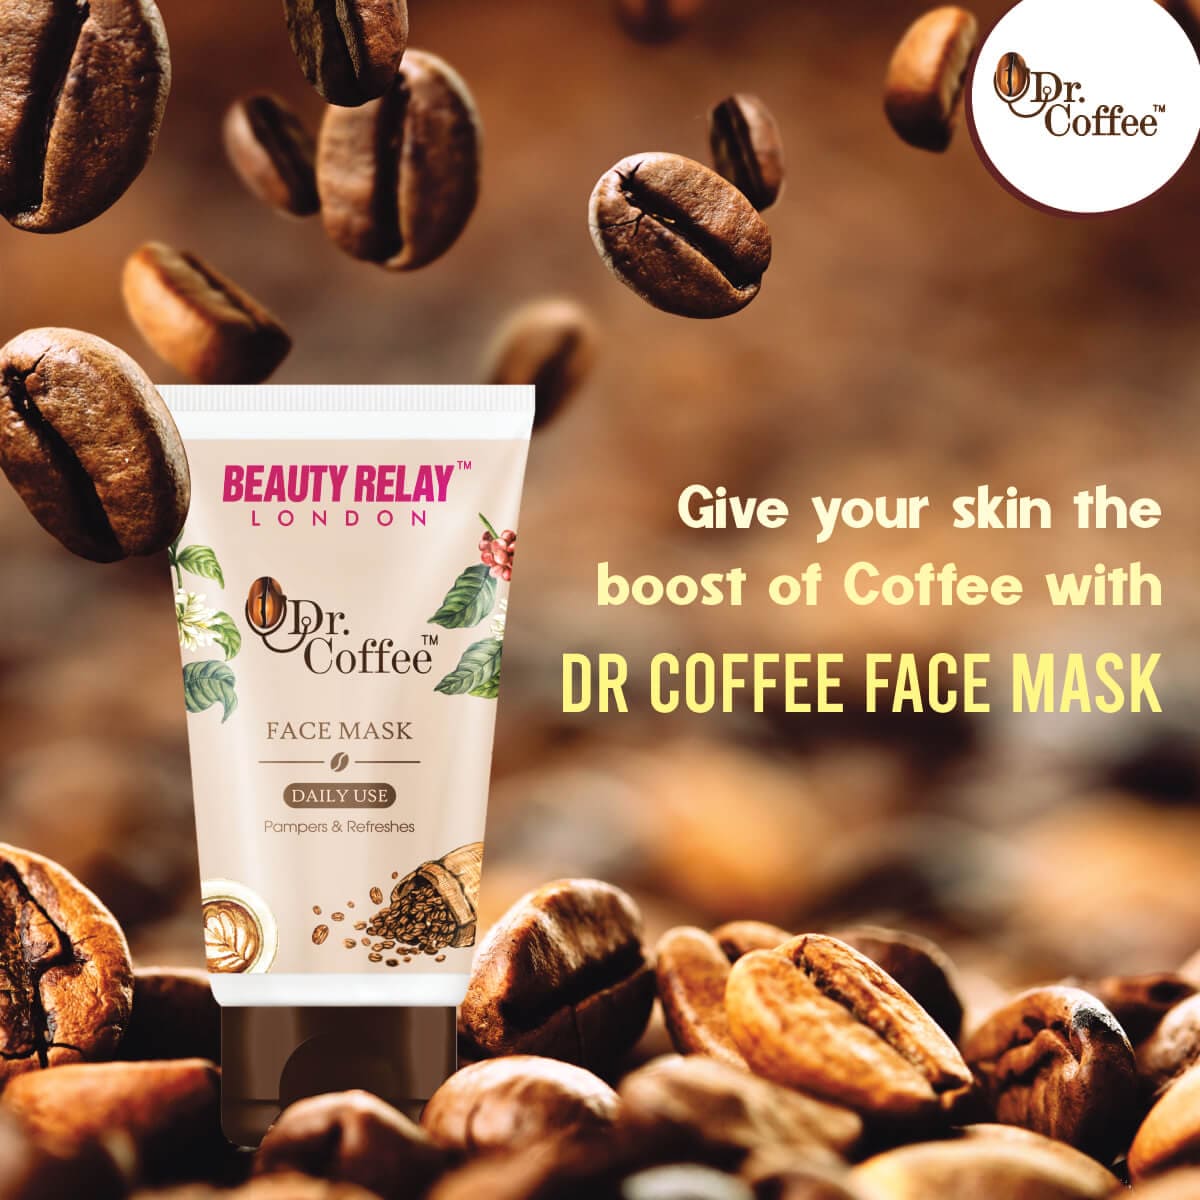 Dr. Coffee Face Mask